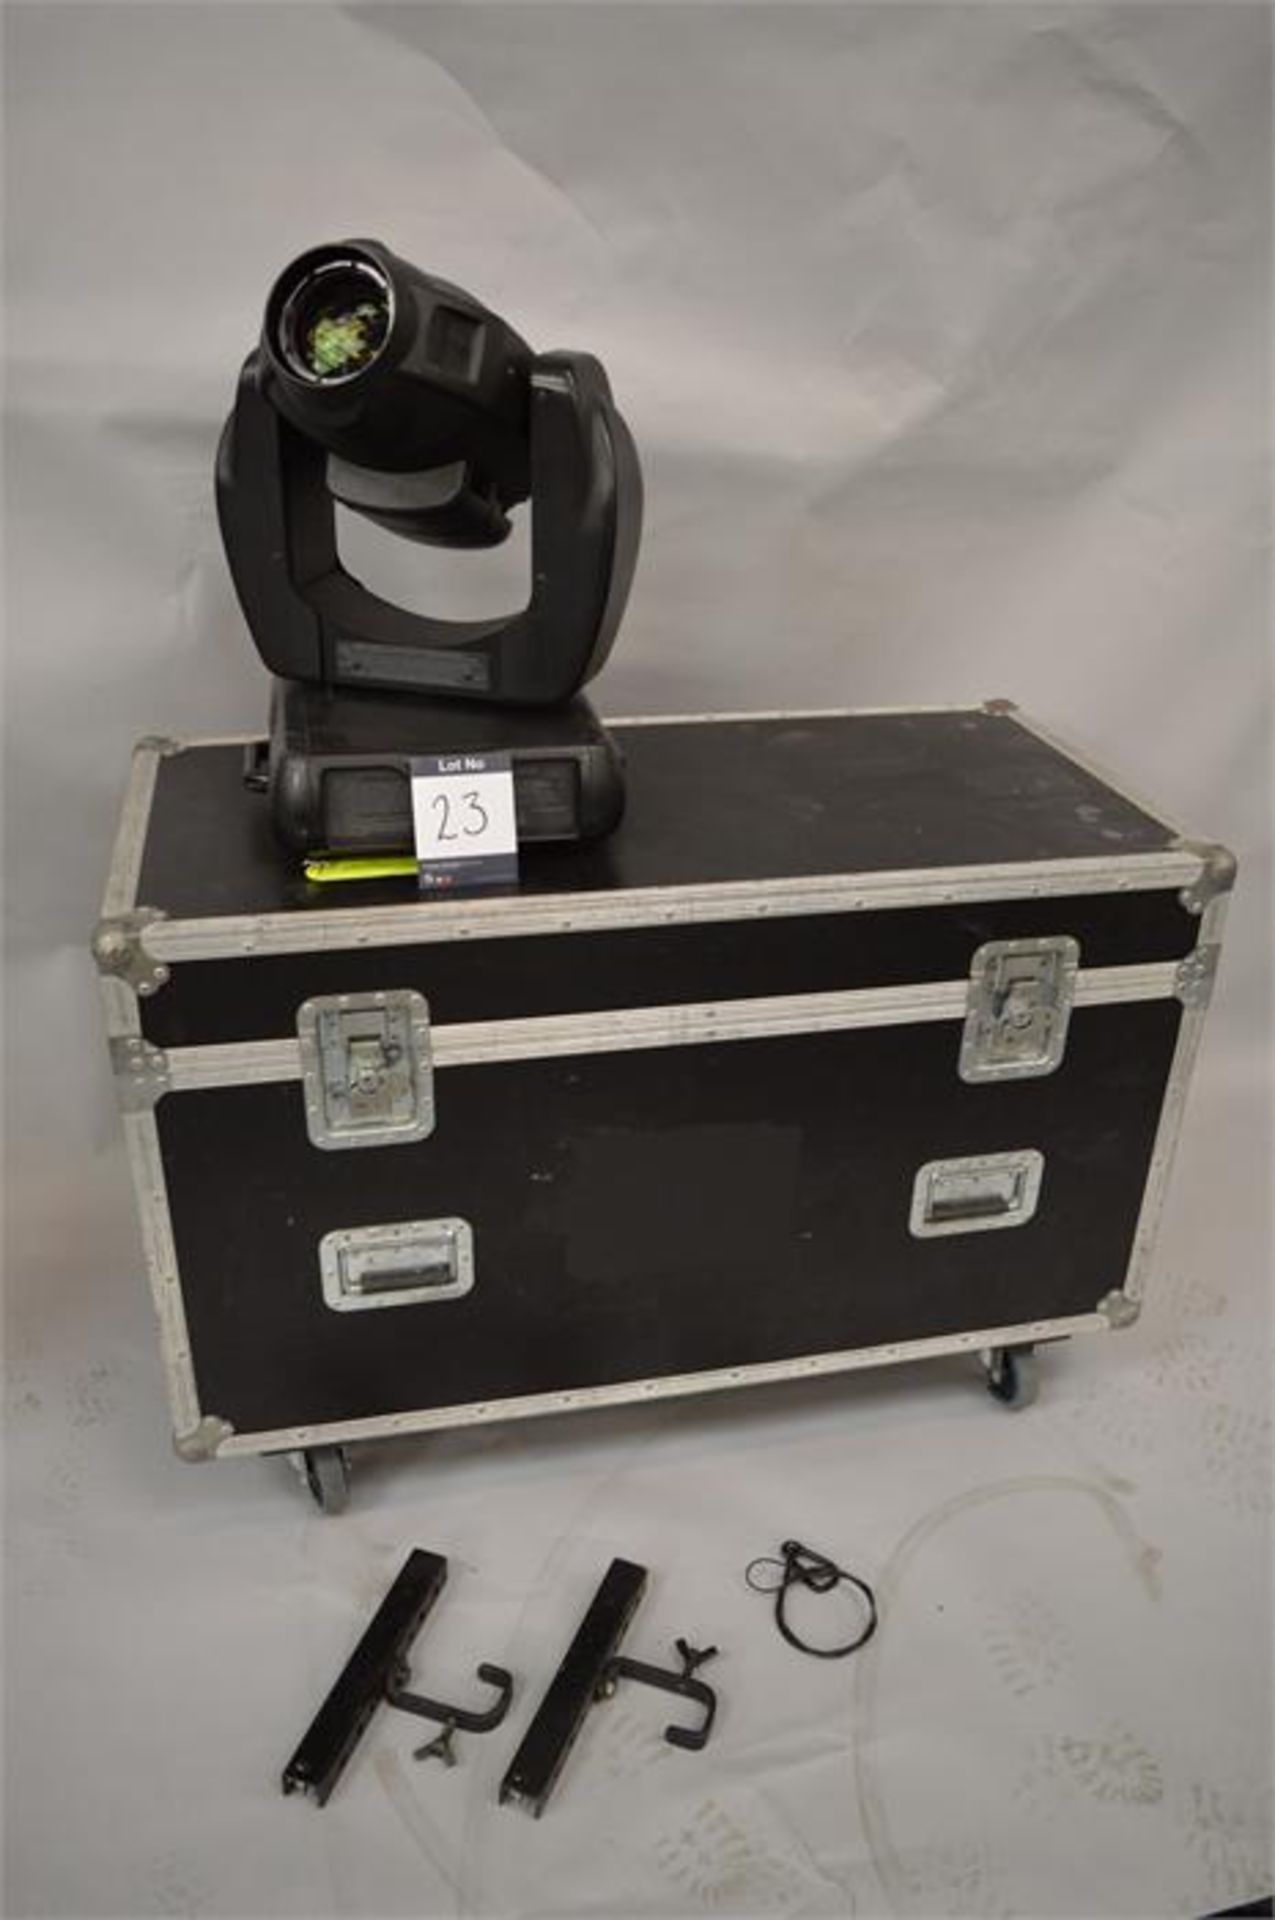 1 x Varilite, VL2000 Moving Head Spot Light with Flightcase and assoiated Brackets, as lotted (maybe - Image 2 of 4